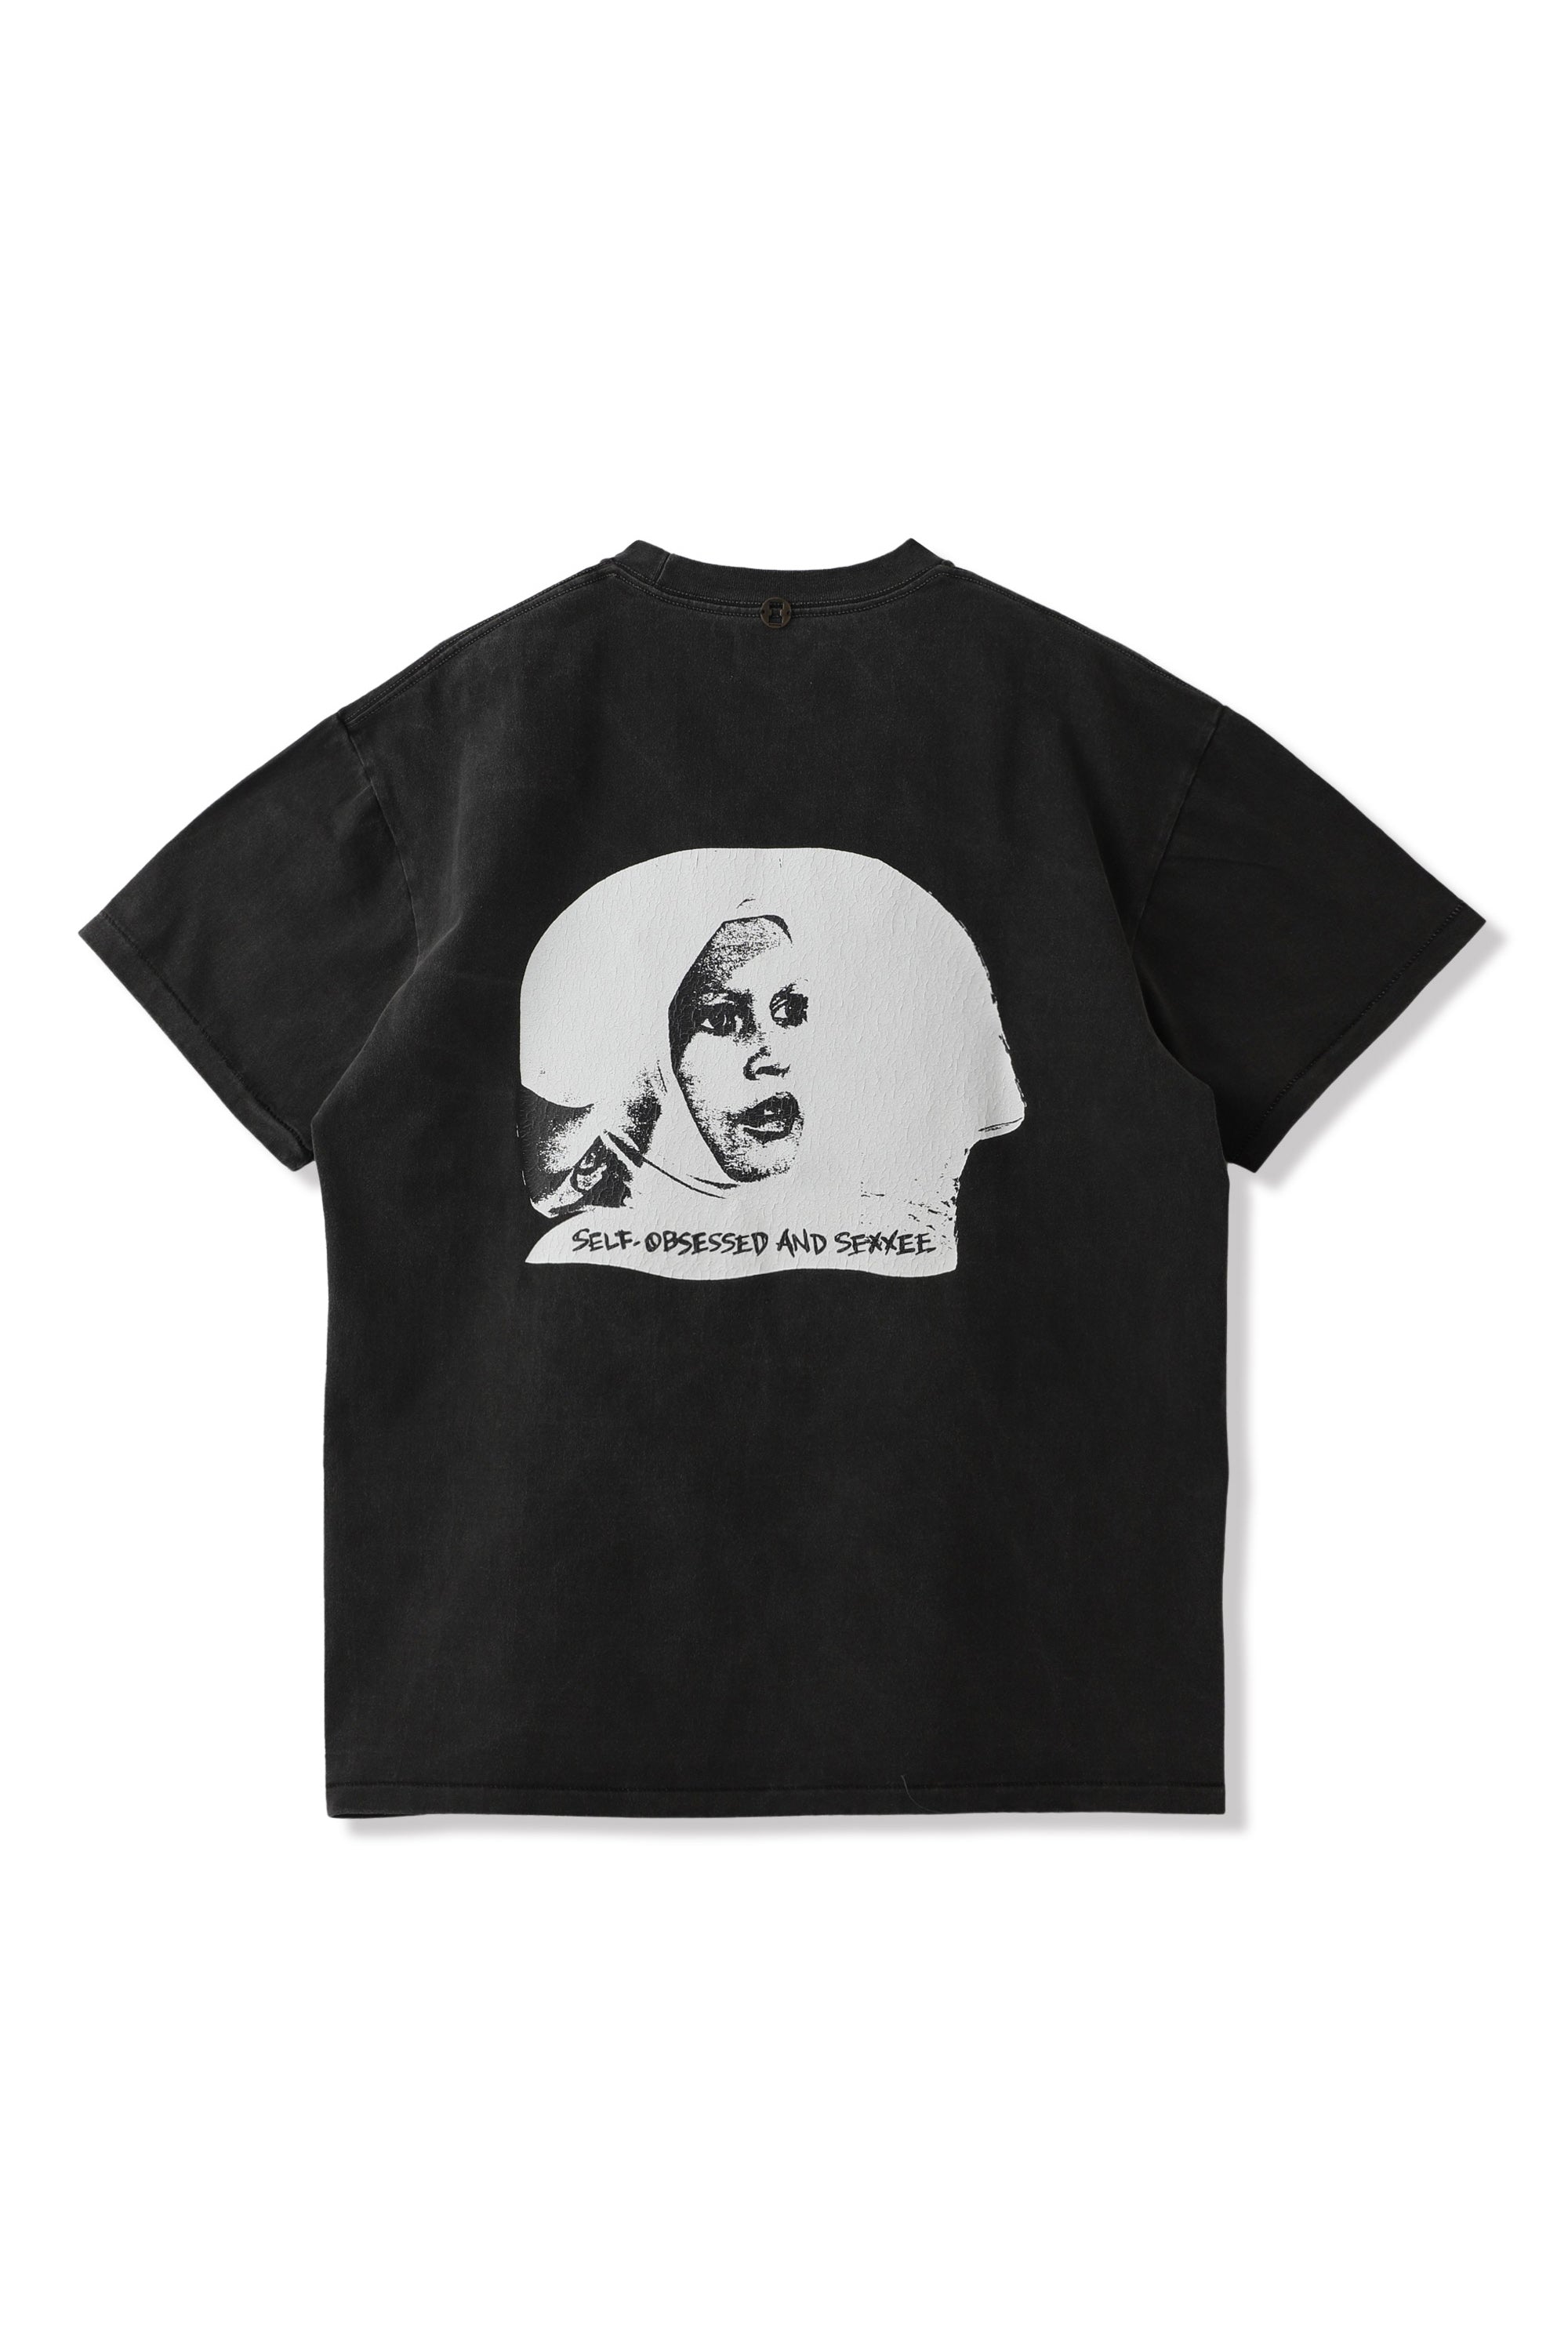 ×SONIC YOUTH SELF OBSESSED AND SEXXEE TEE BLACK